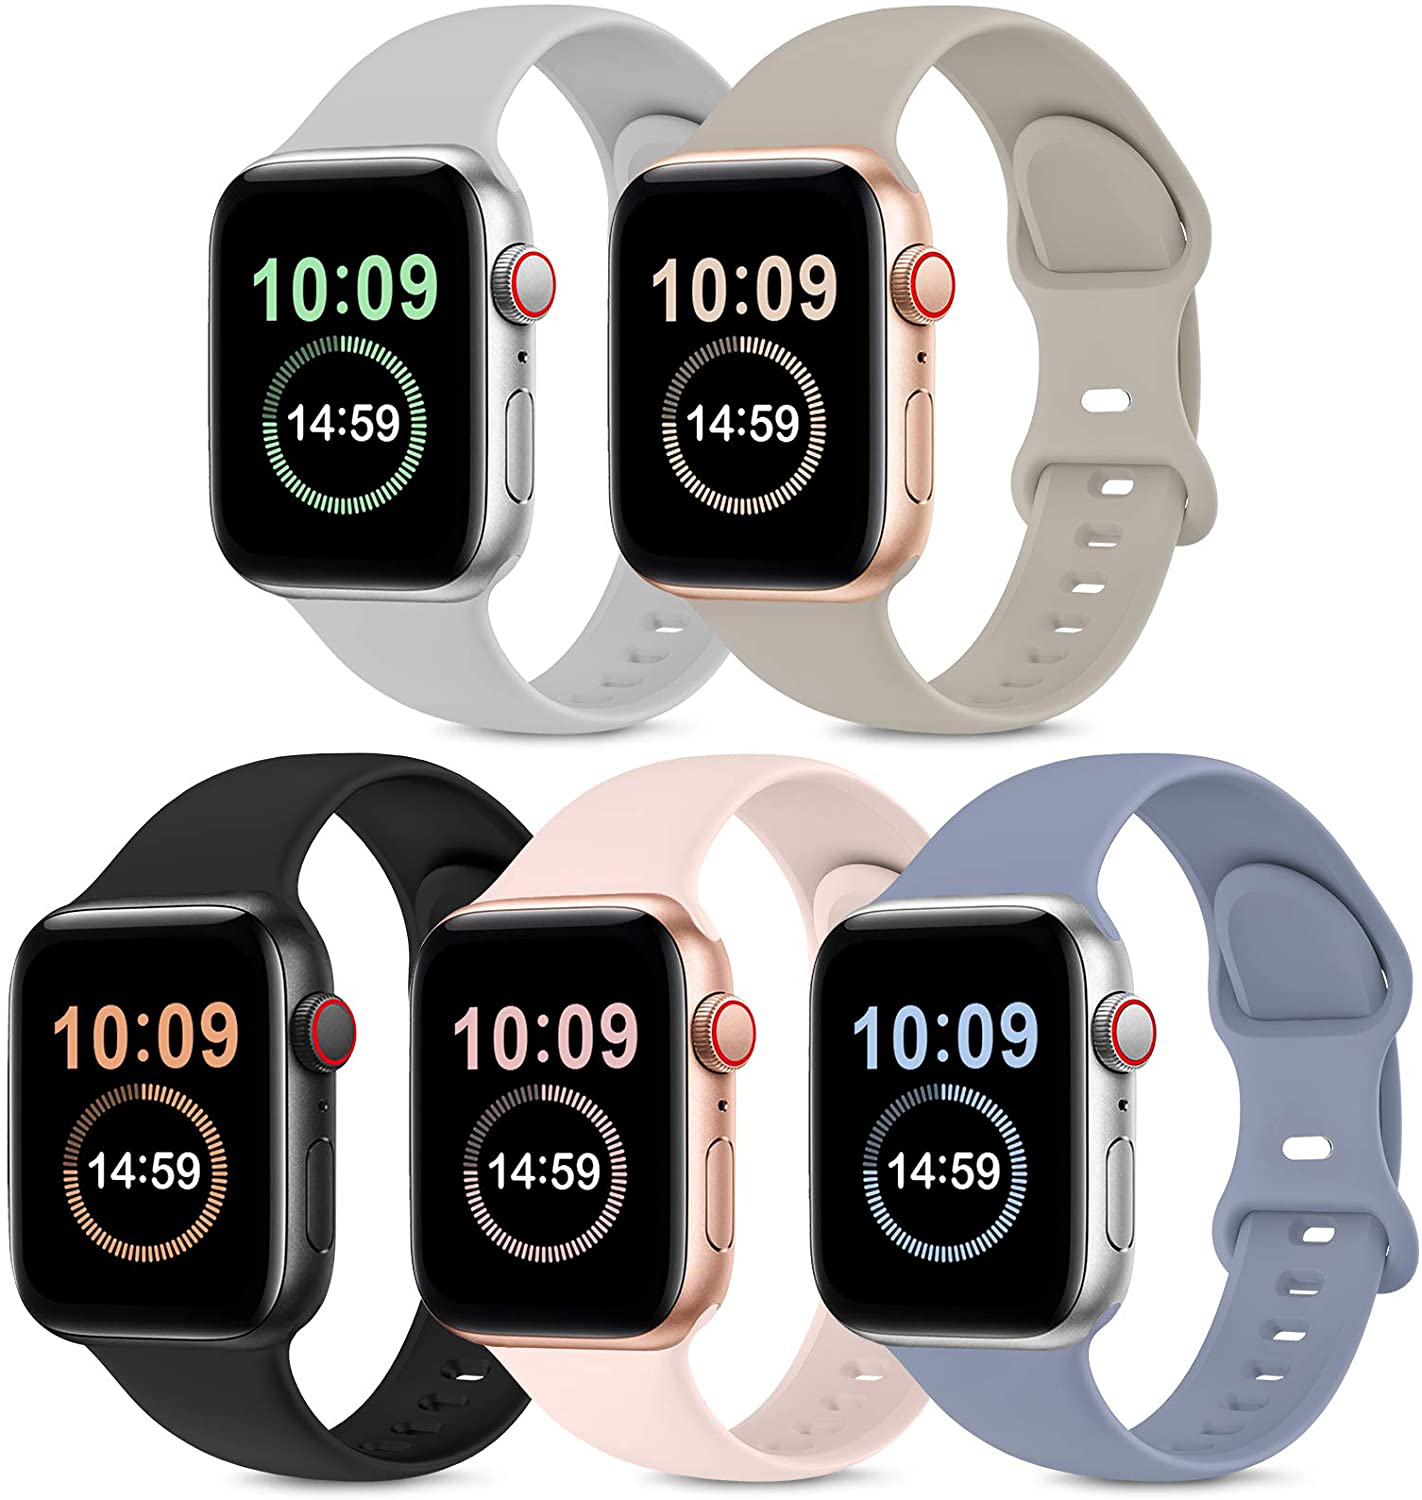 5 Pack Bands Compatible with Apple Watch Band 38mm 40mm, Soft Silicone Sport Replacement Strap Compatible with iWatch Series 6 5 4 3 2 1 SE